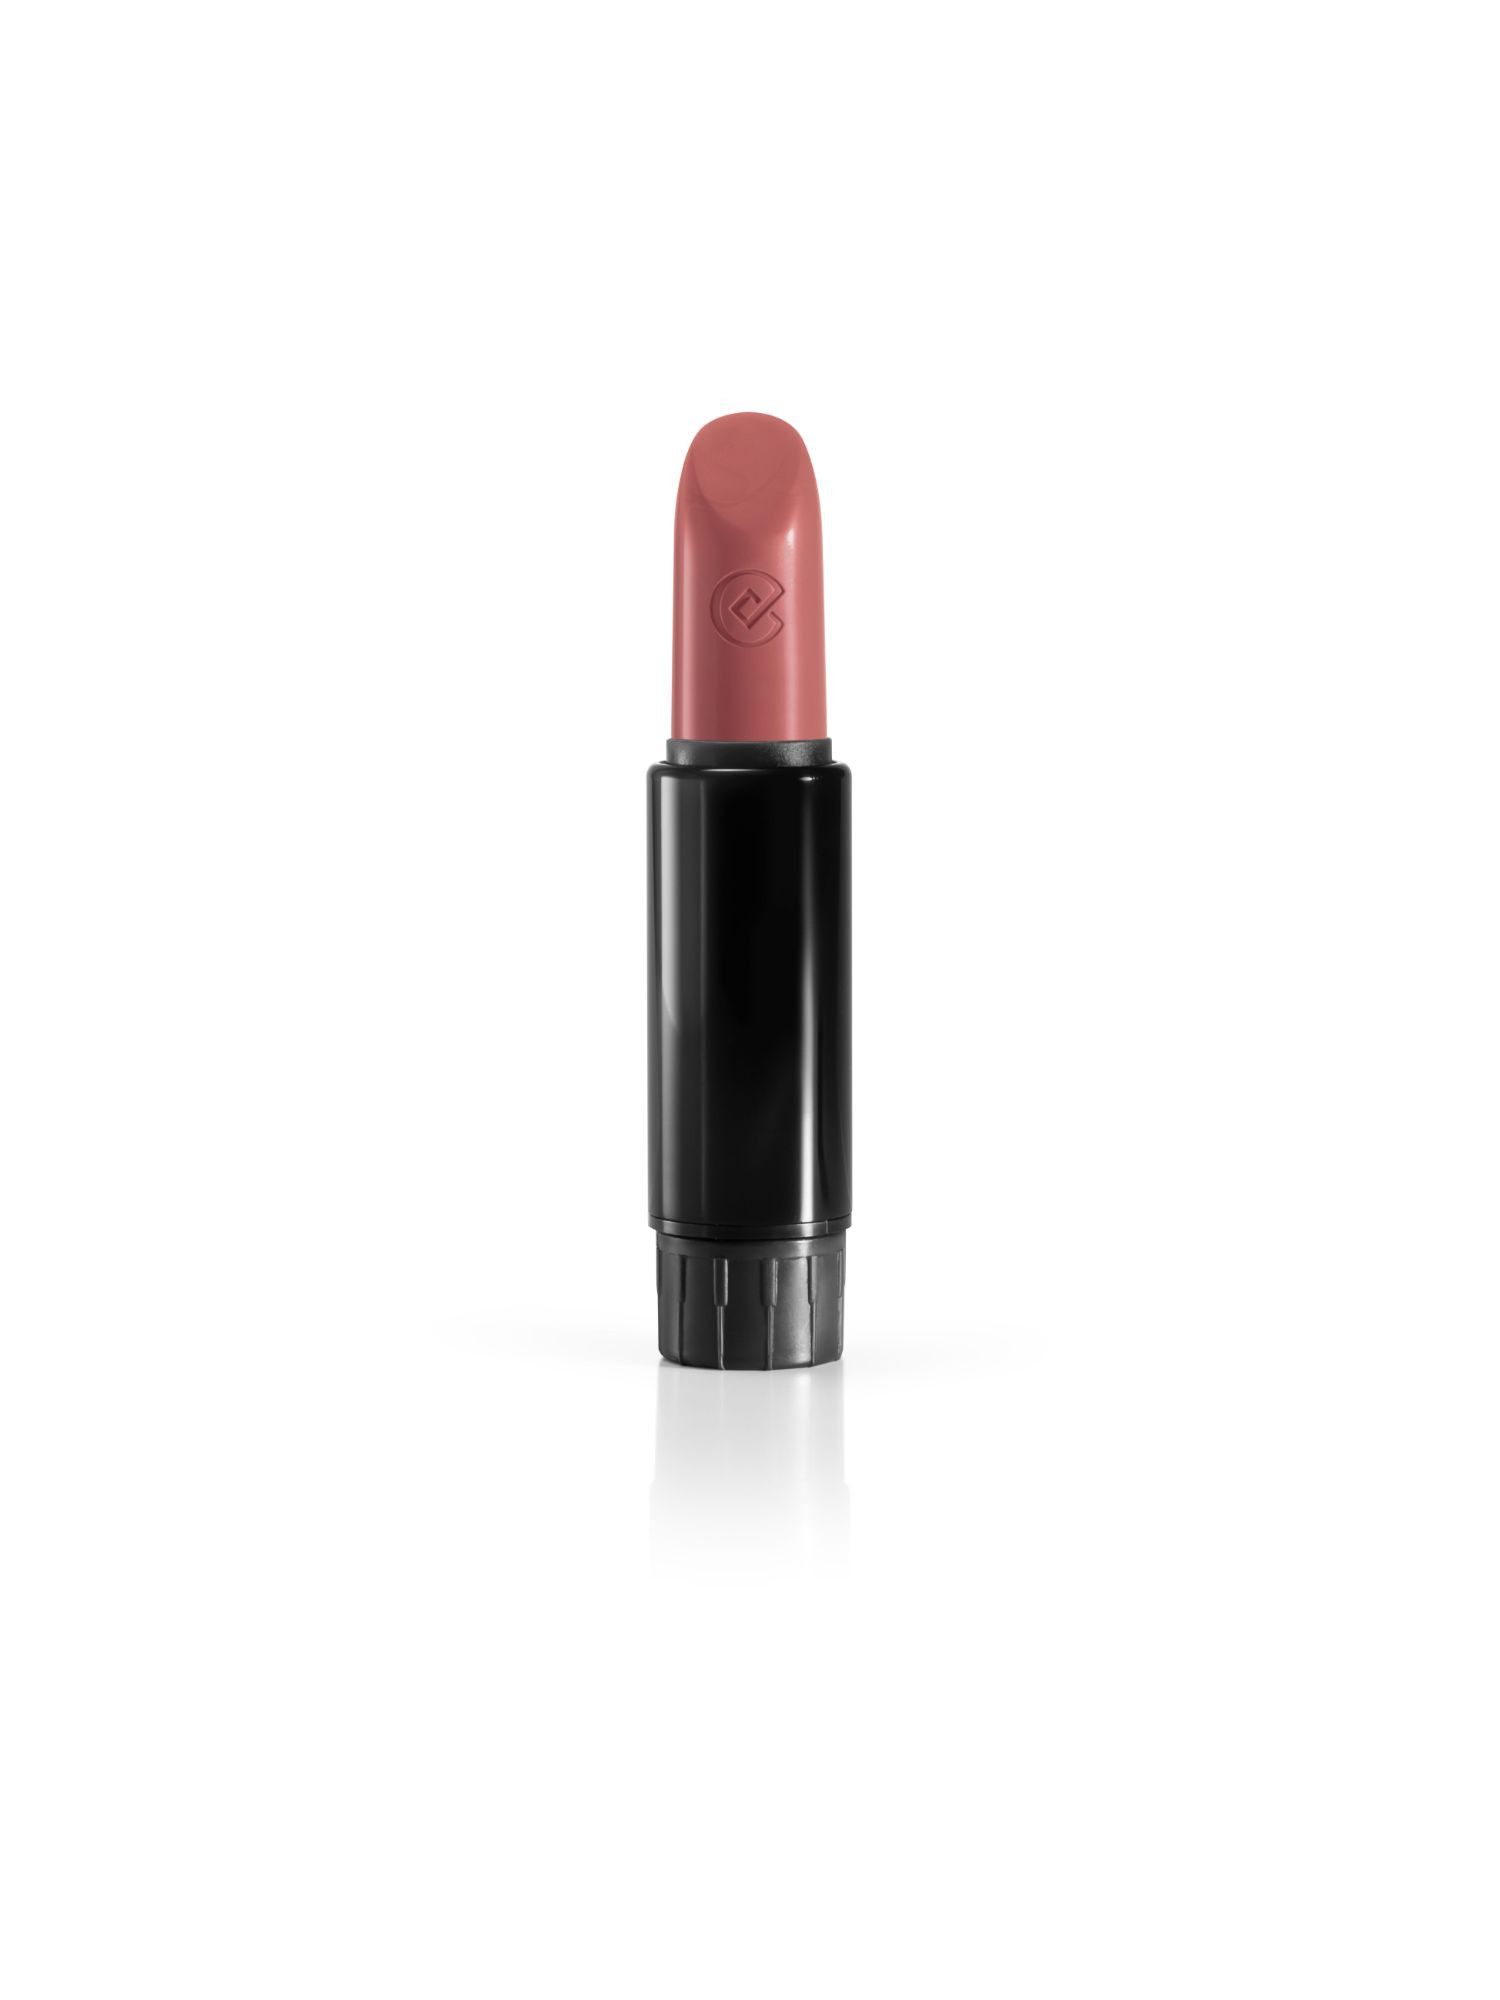 Pure lipstick refill - 101 Blooming almond, Light Pink, large image number 0